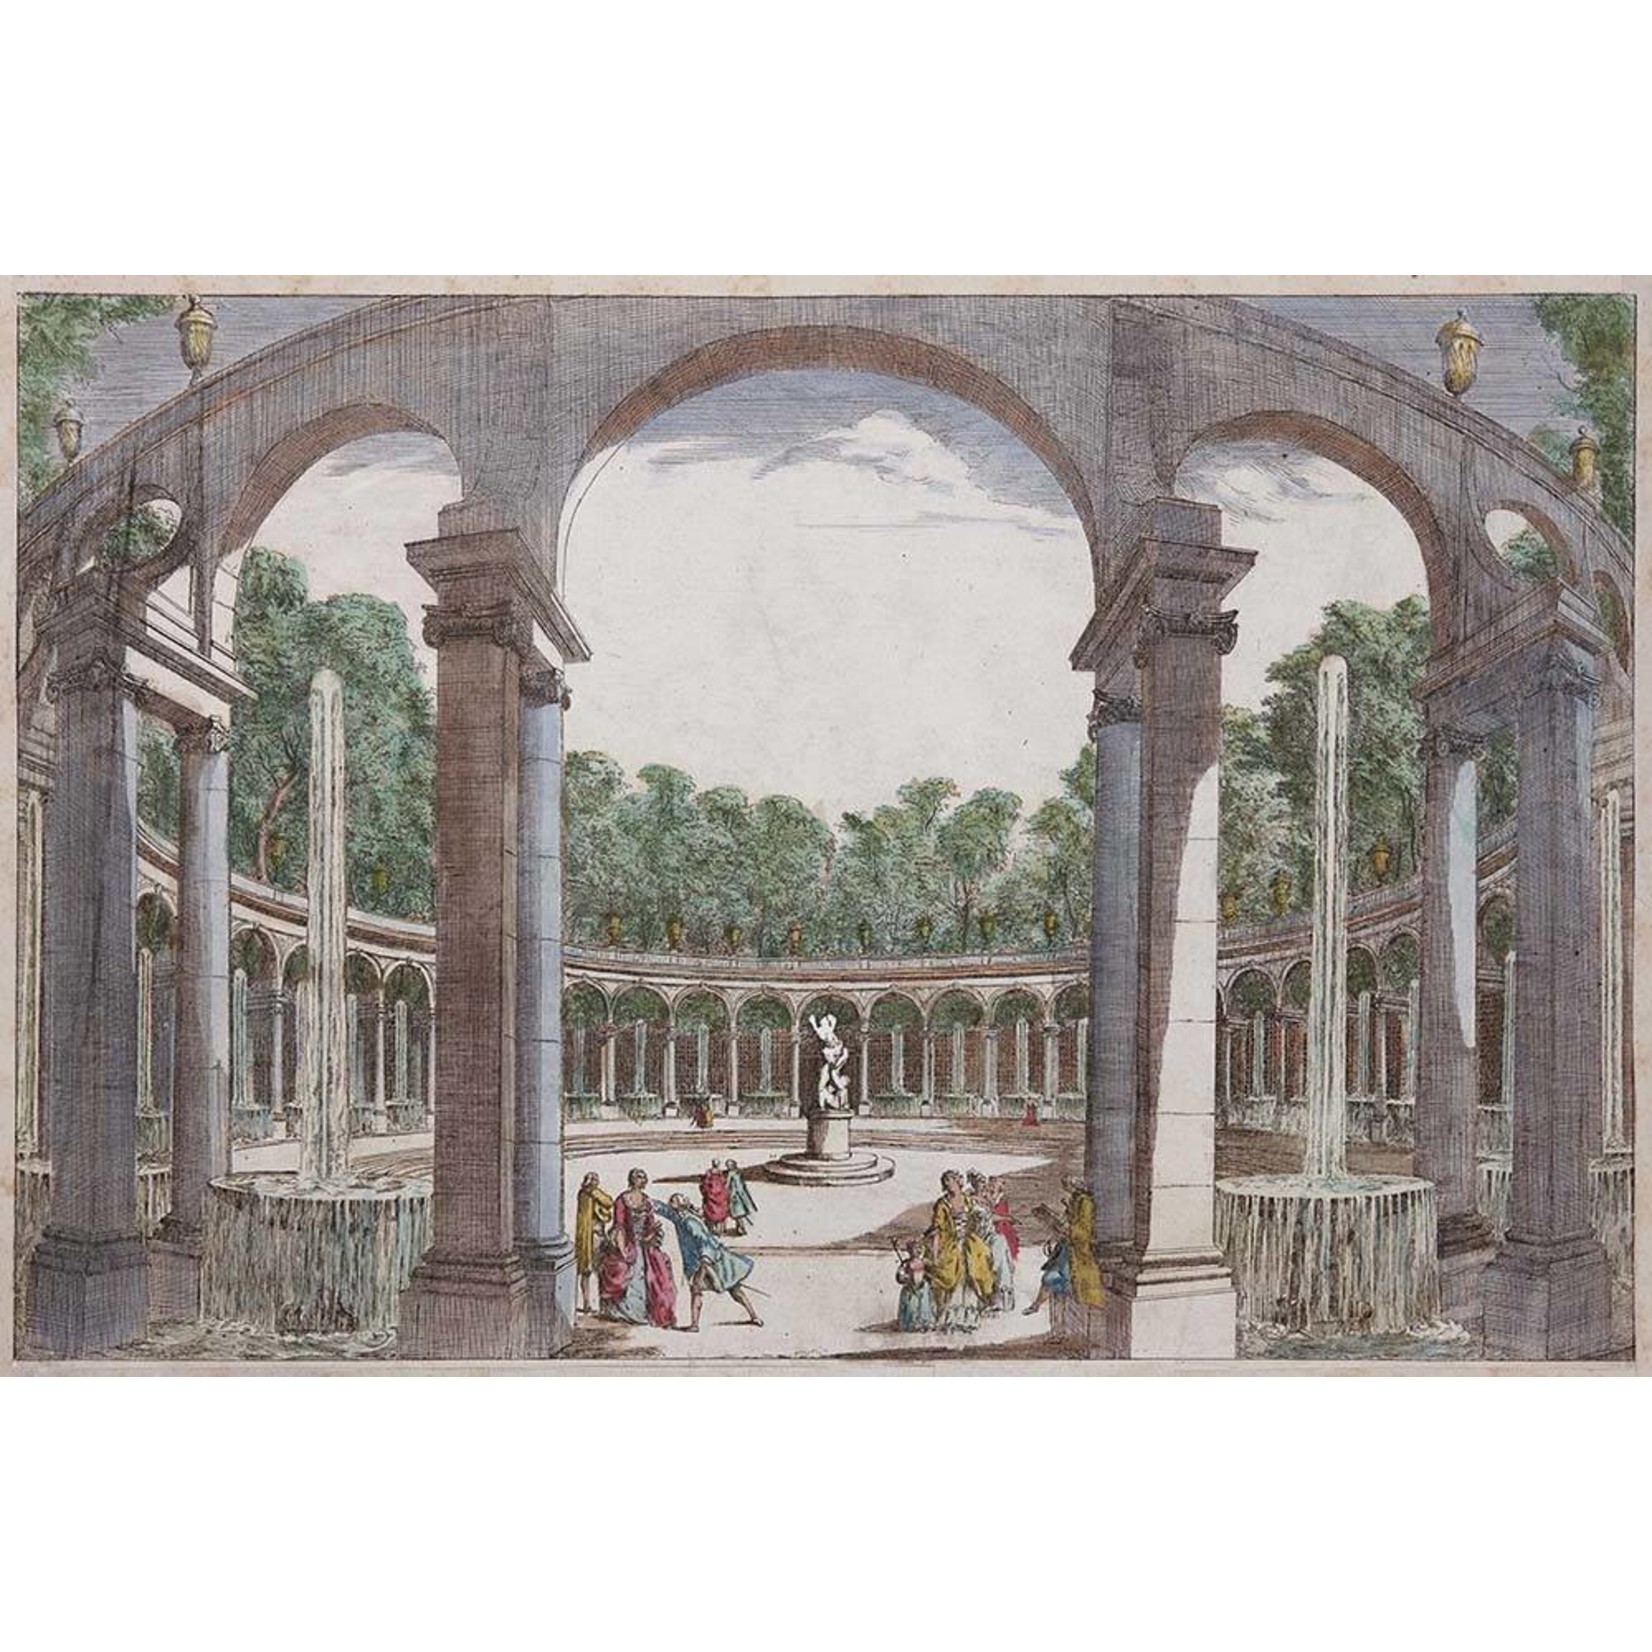 Framed Print on Rag Paper: La Rotonde Antique Architectural Drawings